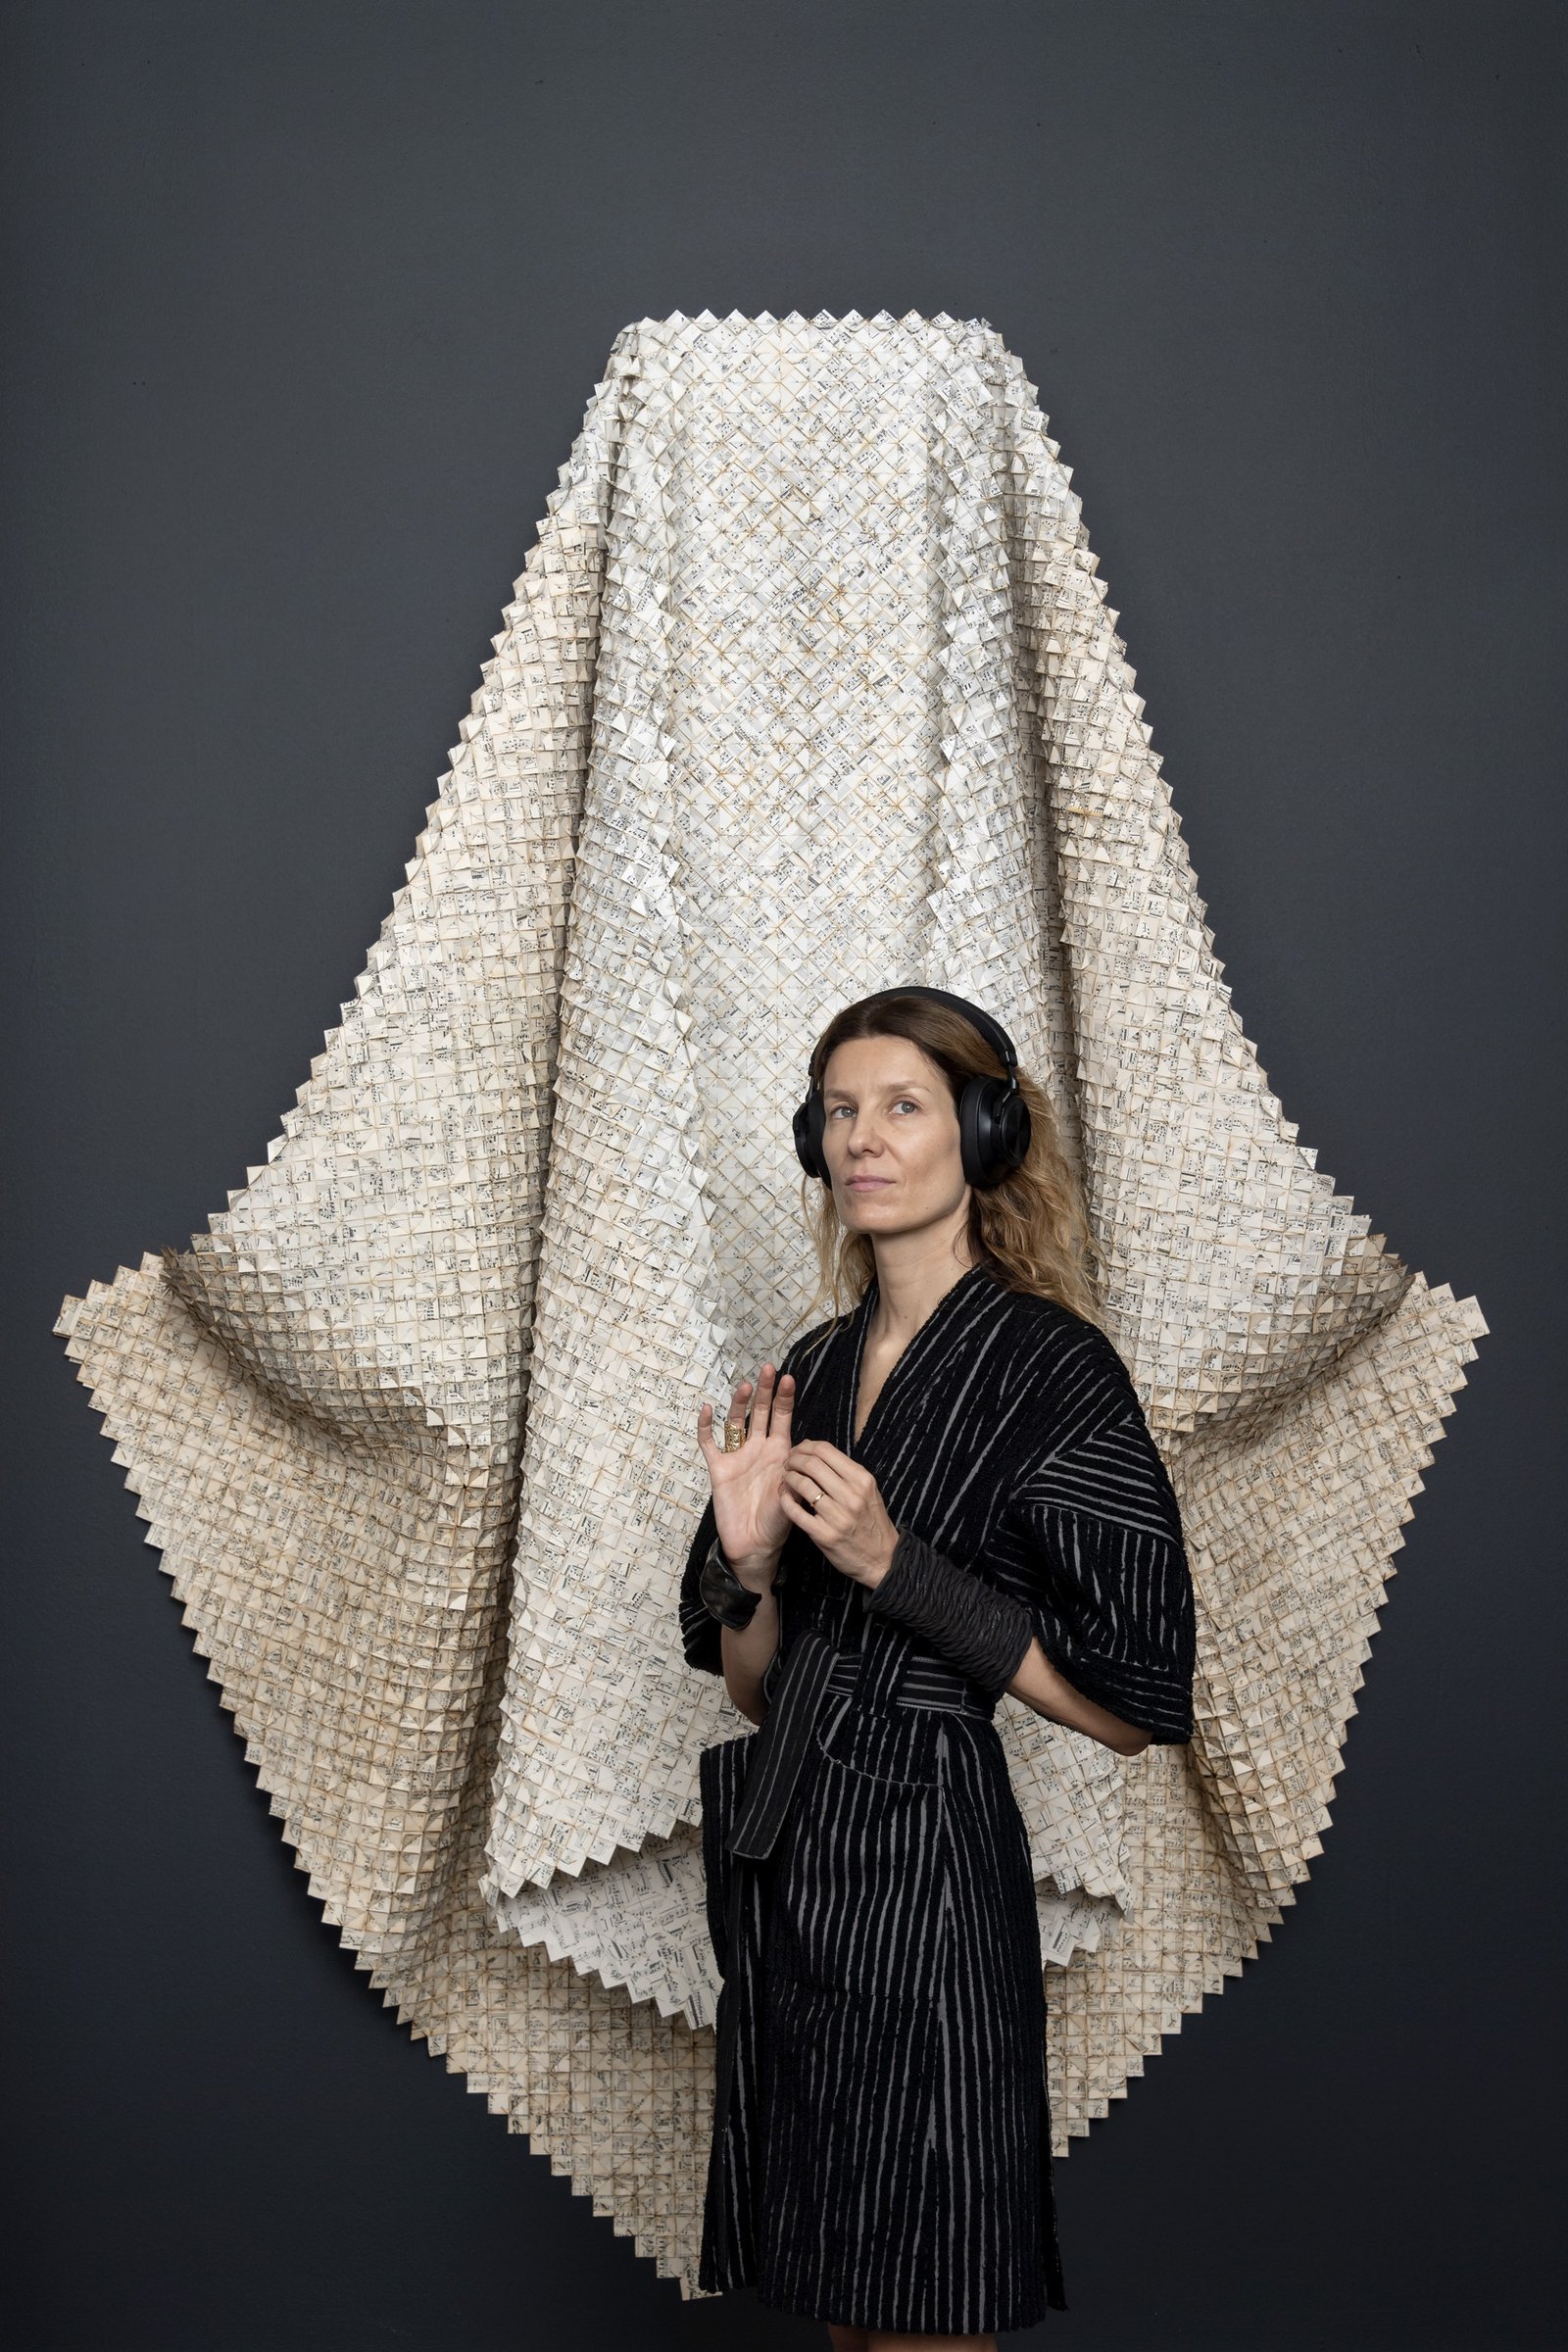 Catalina Swinburn stands in front of Das Lied von der Erde (The Song of the Earth) by Gustav Mahler, 2018/2019, a woven paper piece made of music score pages using Chinese poetry by Li Bai, Meng Haoran, Qian Qi &amp; Wang Wei of the Tang Dynasty. 230h x 180w x 55d cmCourtesy of Catalina Swinburn Studio and Selma Feriani Gallery